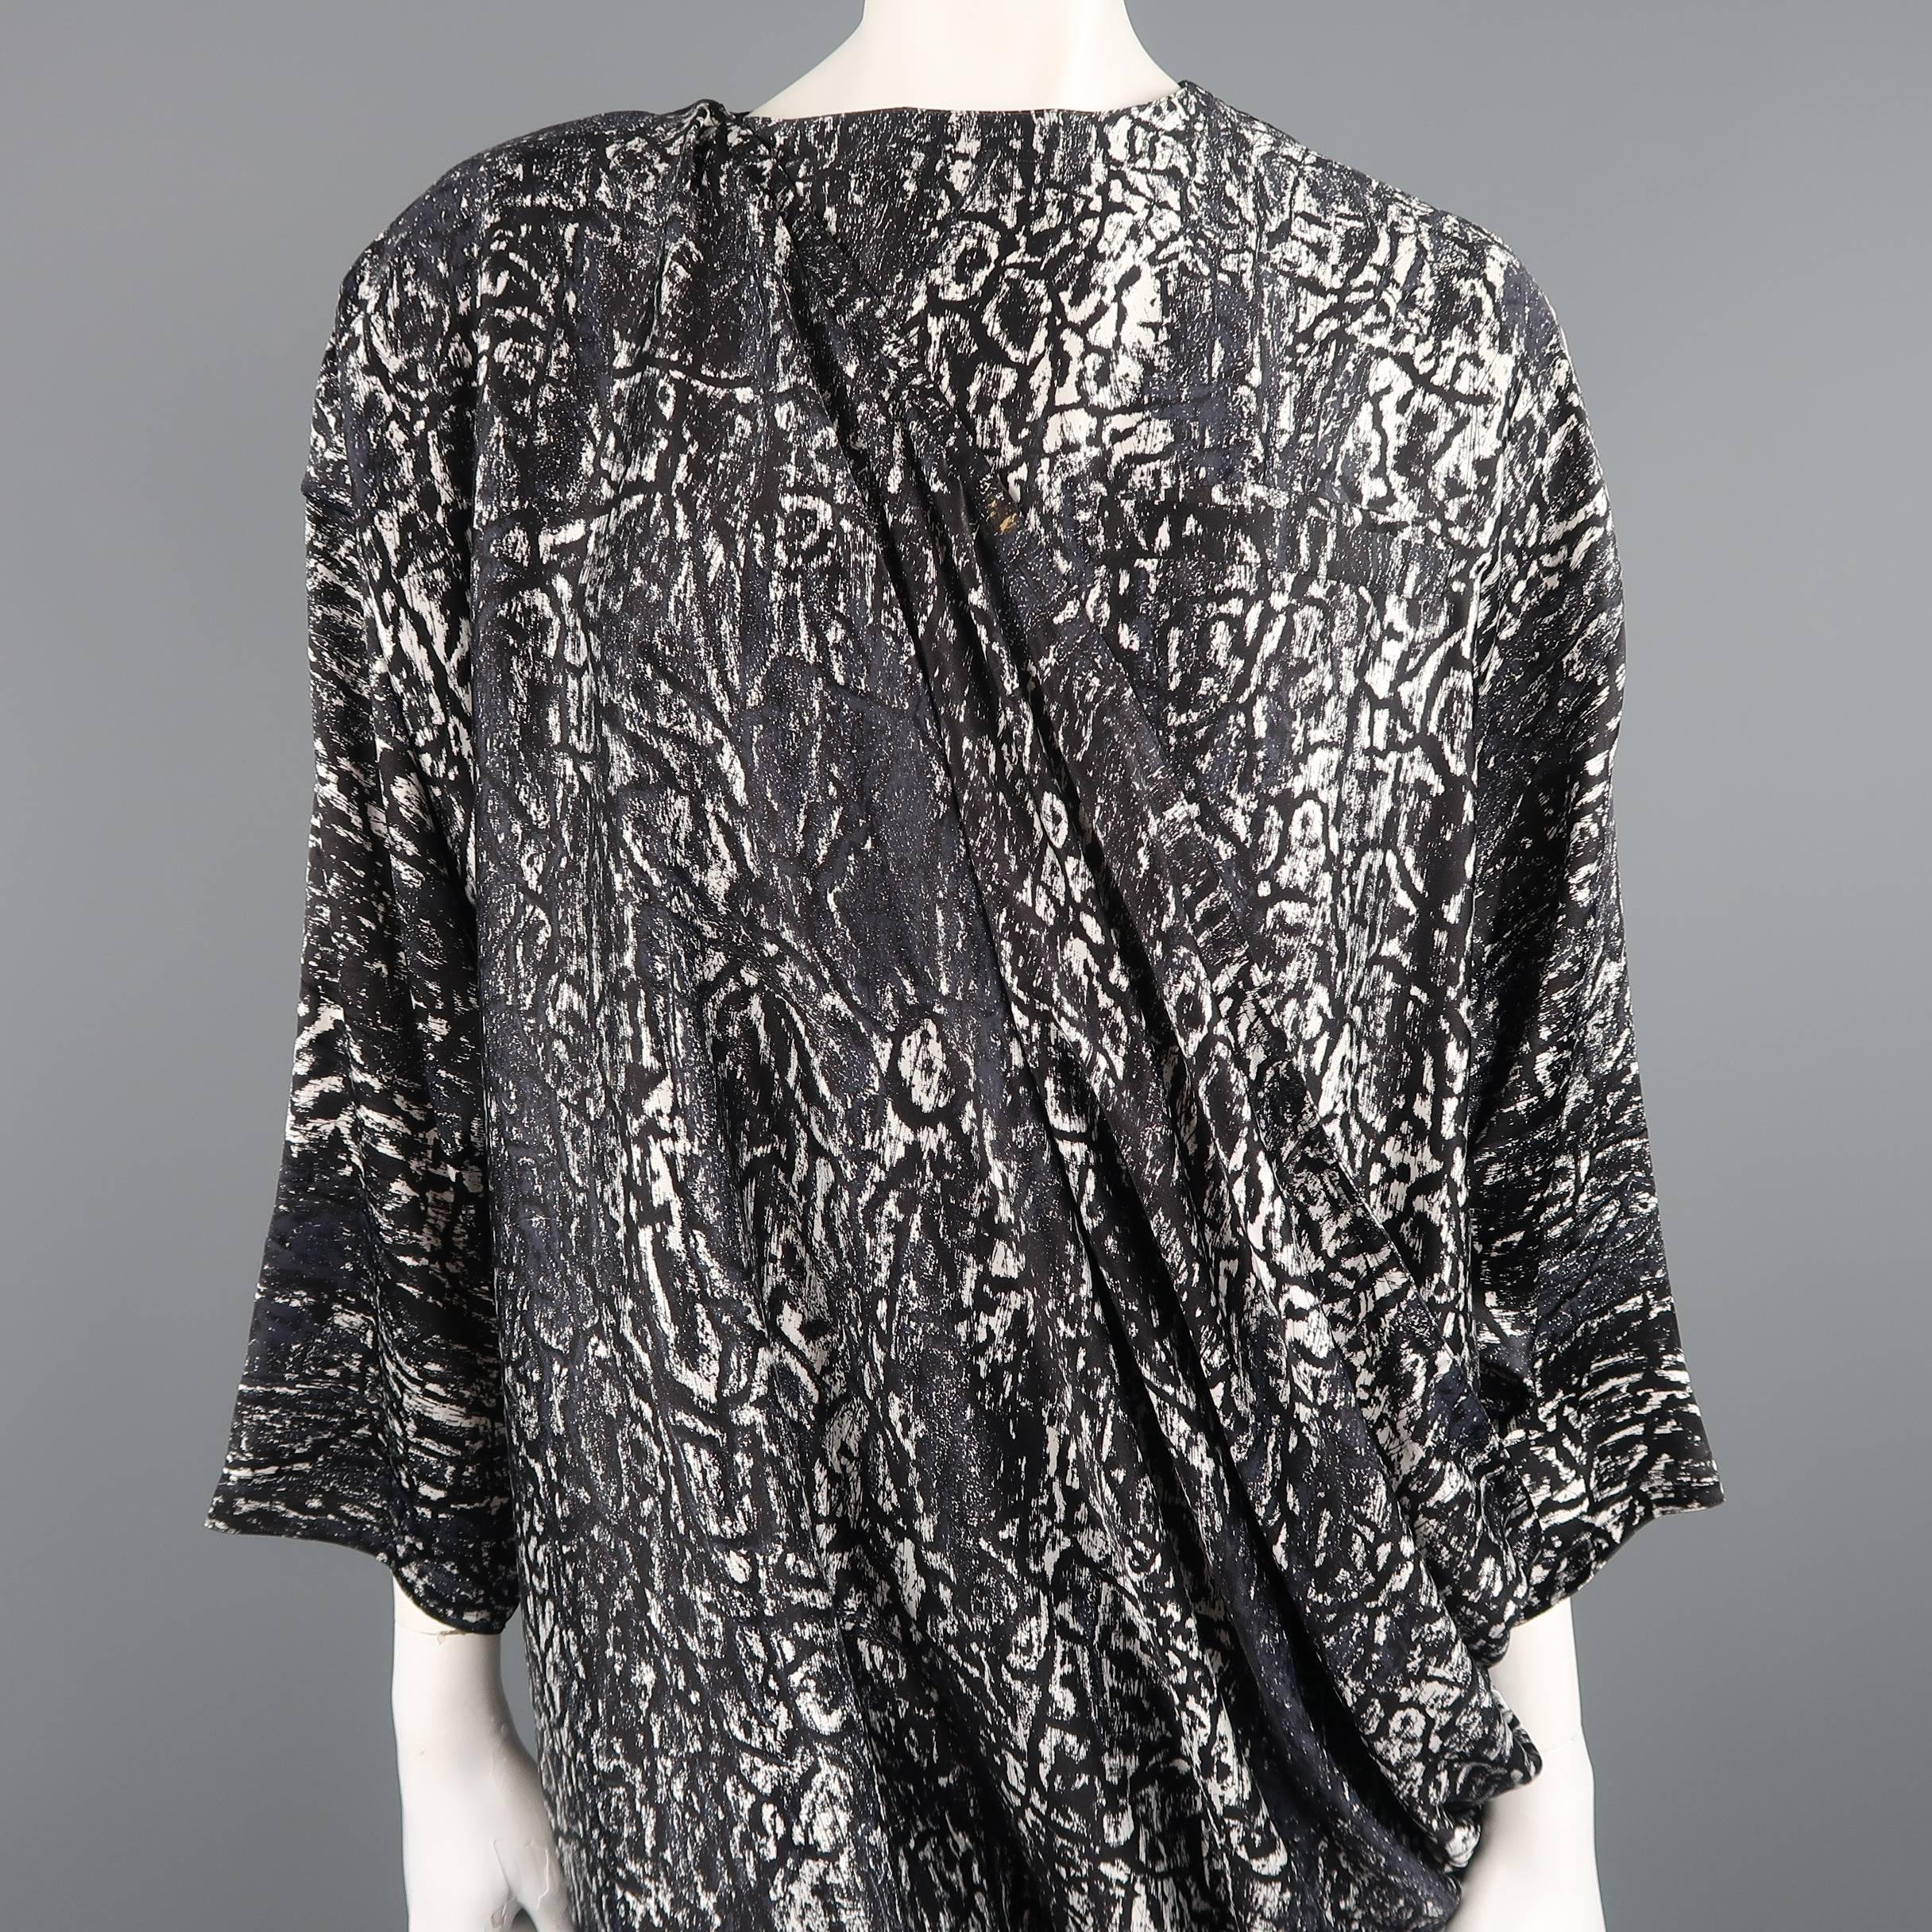 Vintage Early 1980's GIANNI VERSACE shift dress comes in charcoal gray and cream marbled cheetah print sateen and features a crewneck boxy three quarter top with padded shoulder, three quarter sleeves, and an asymmetrical draped skirt from the